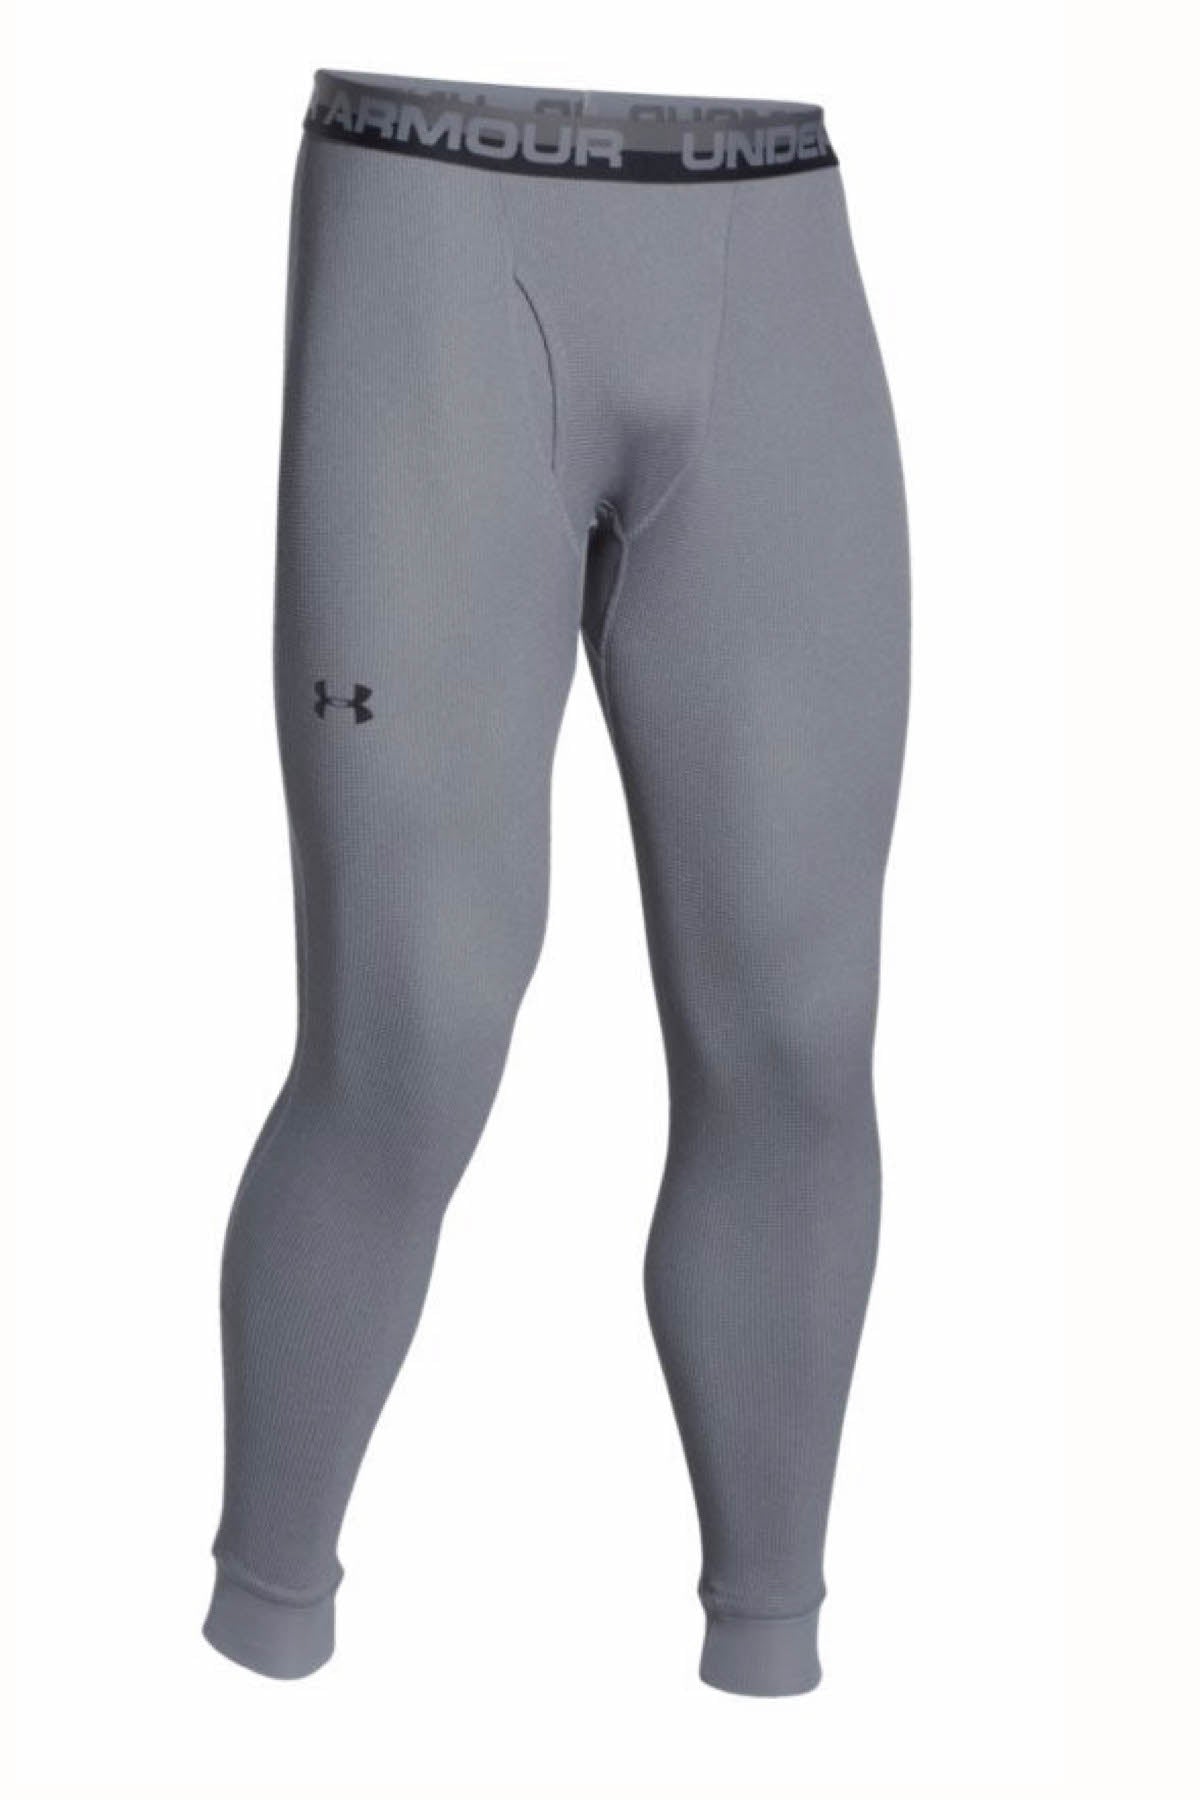 Under Armour Steel Amplify Thermal Legging